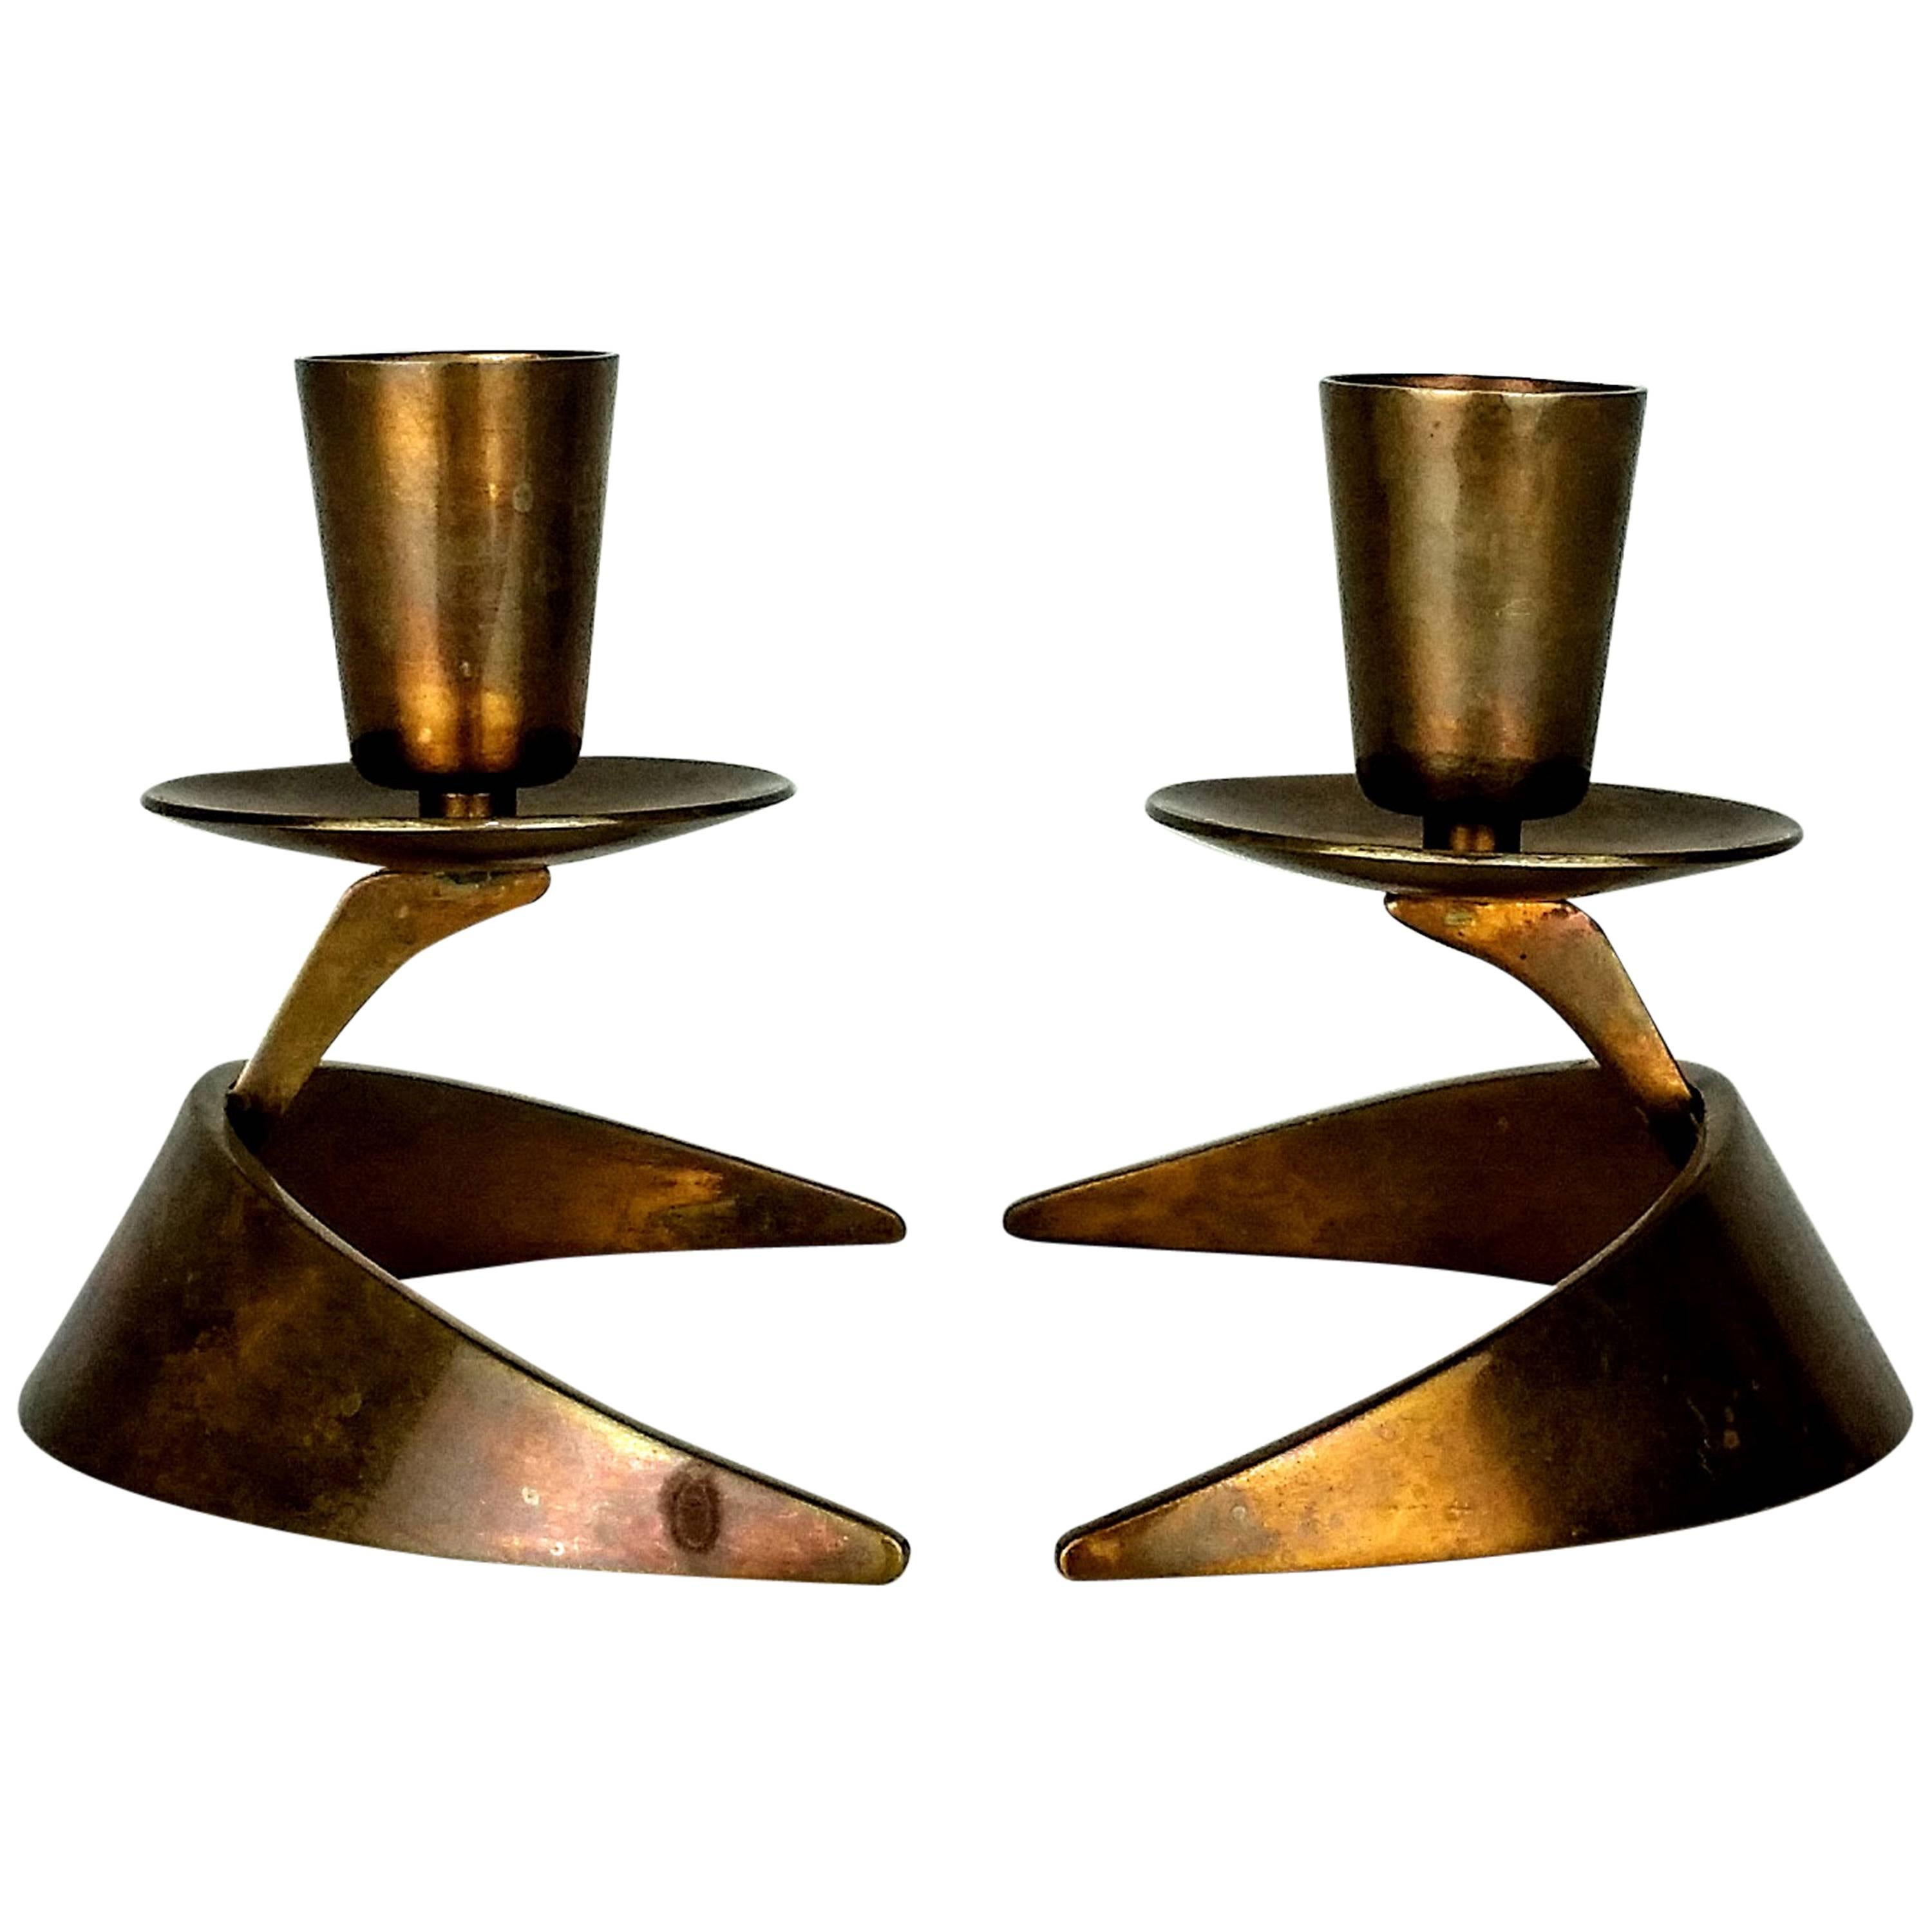 Rare Modernist Candle Holders in Solid Bronze by John Prip and Ronald Pearson